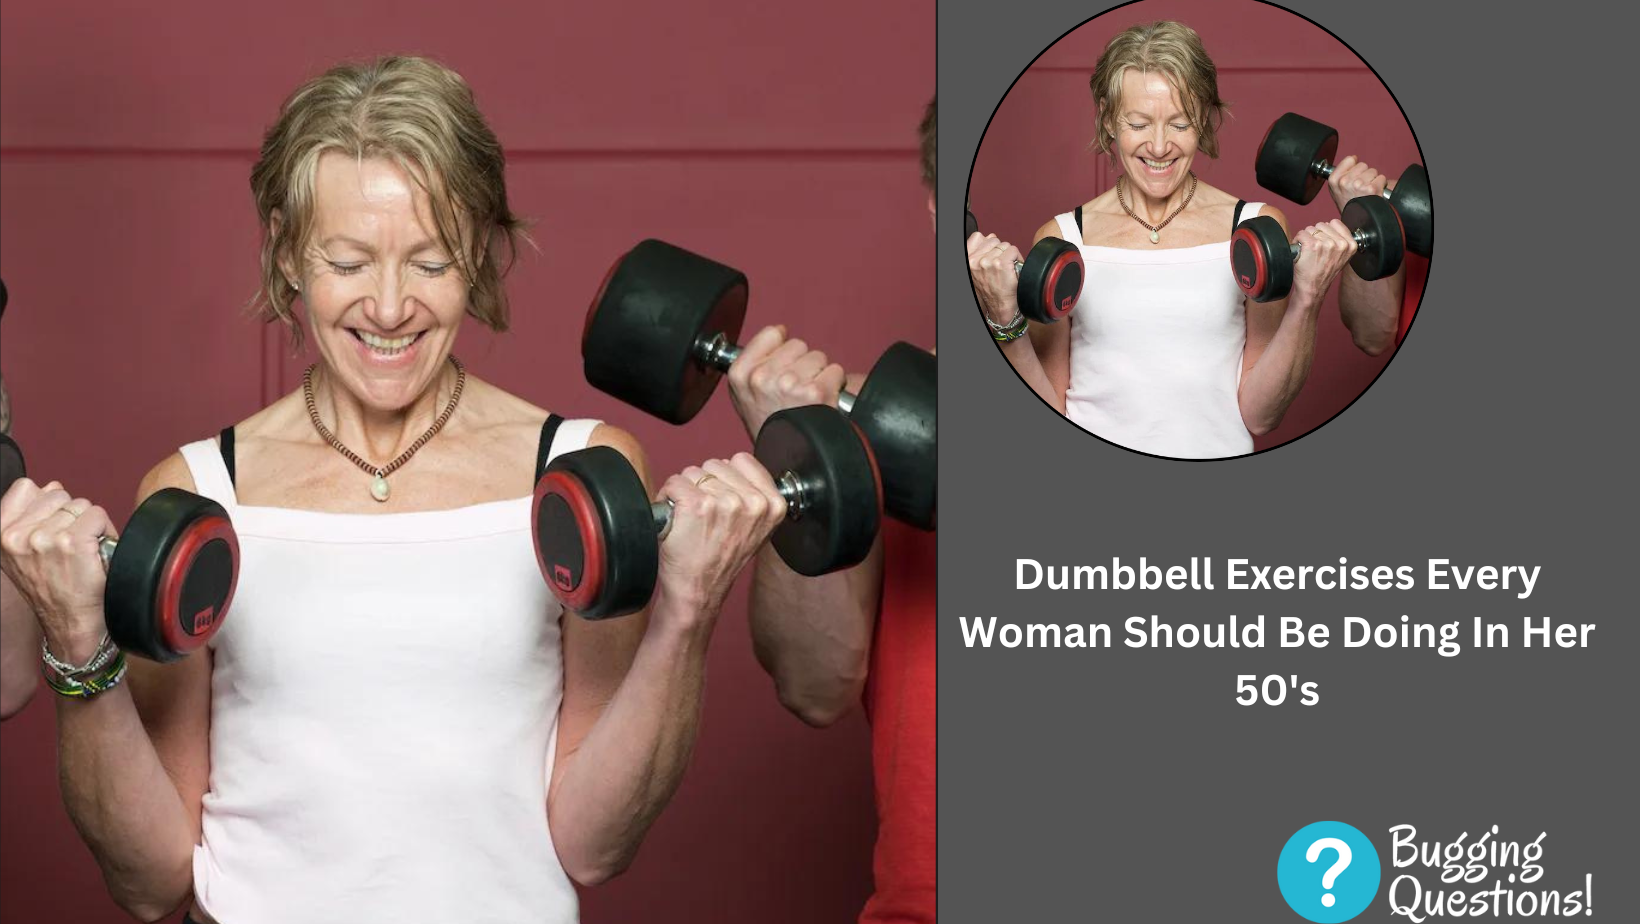 Dumbbell Exercises Every Woman Should Be Doing In Her 50's